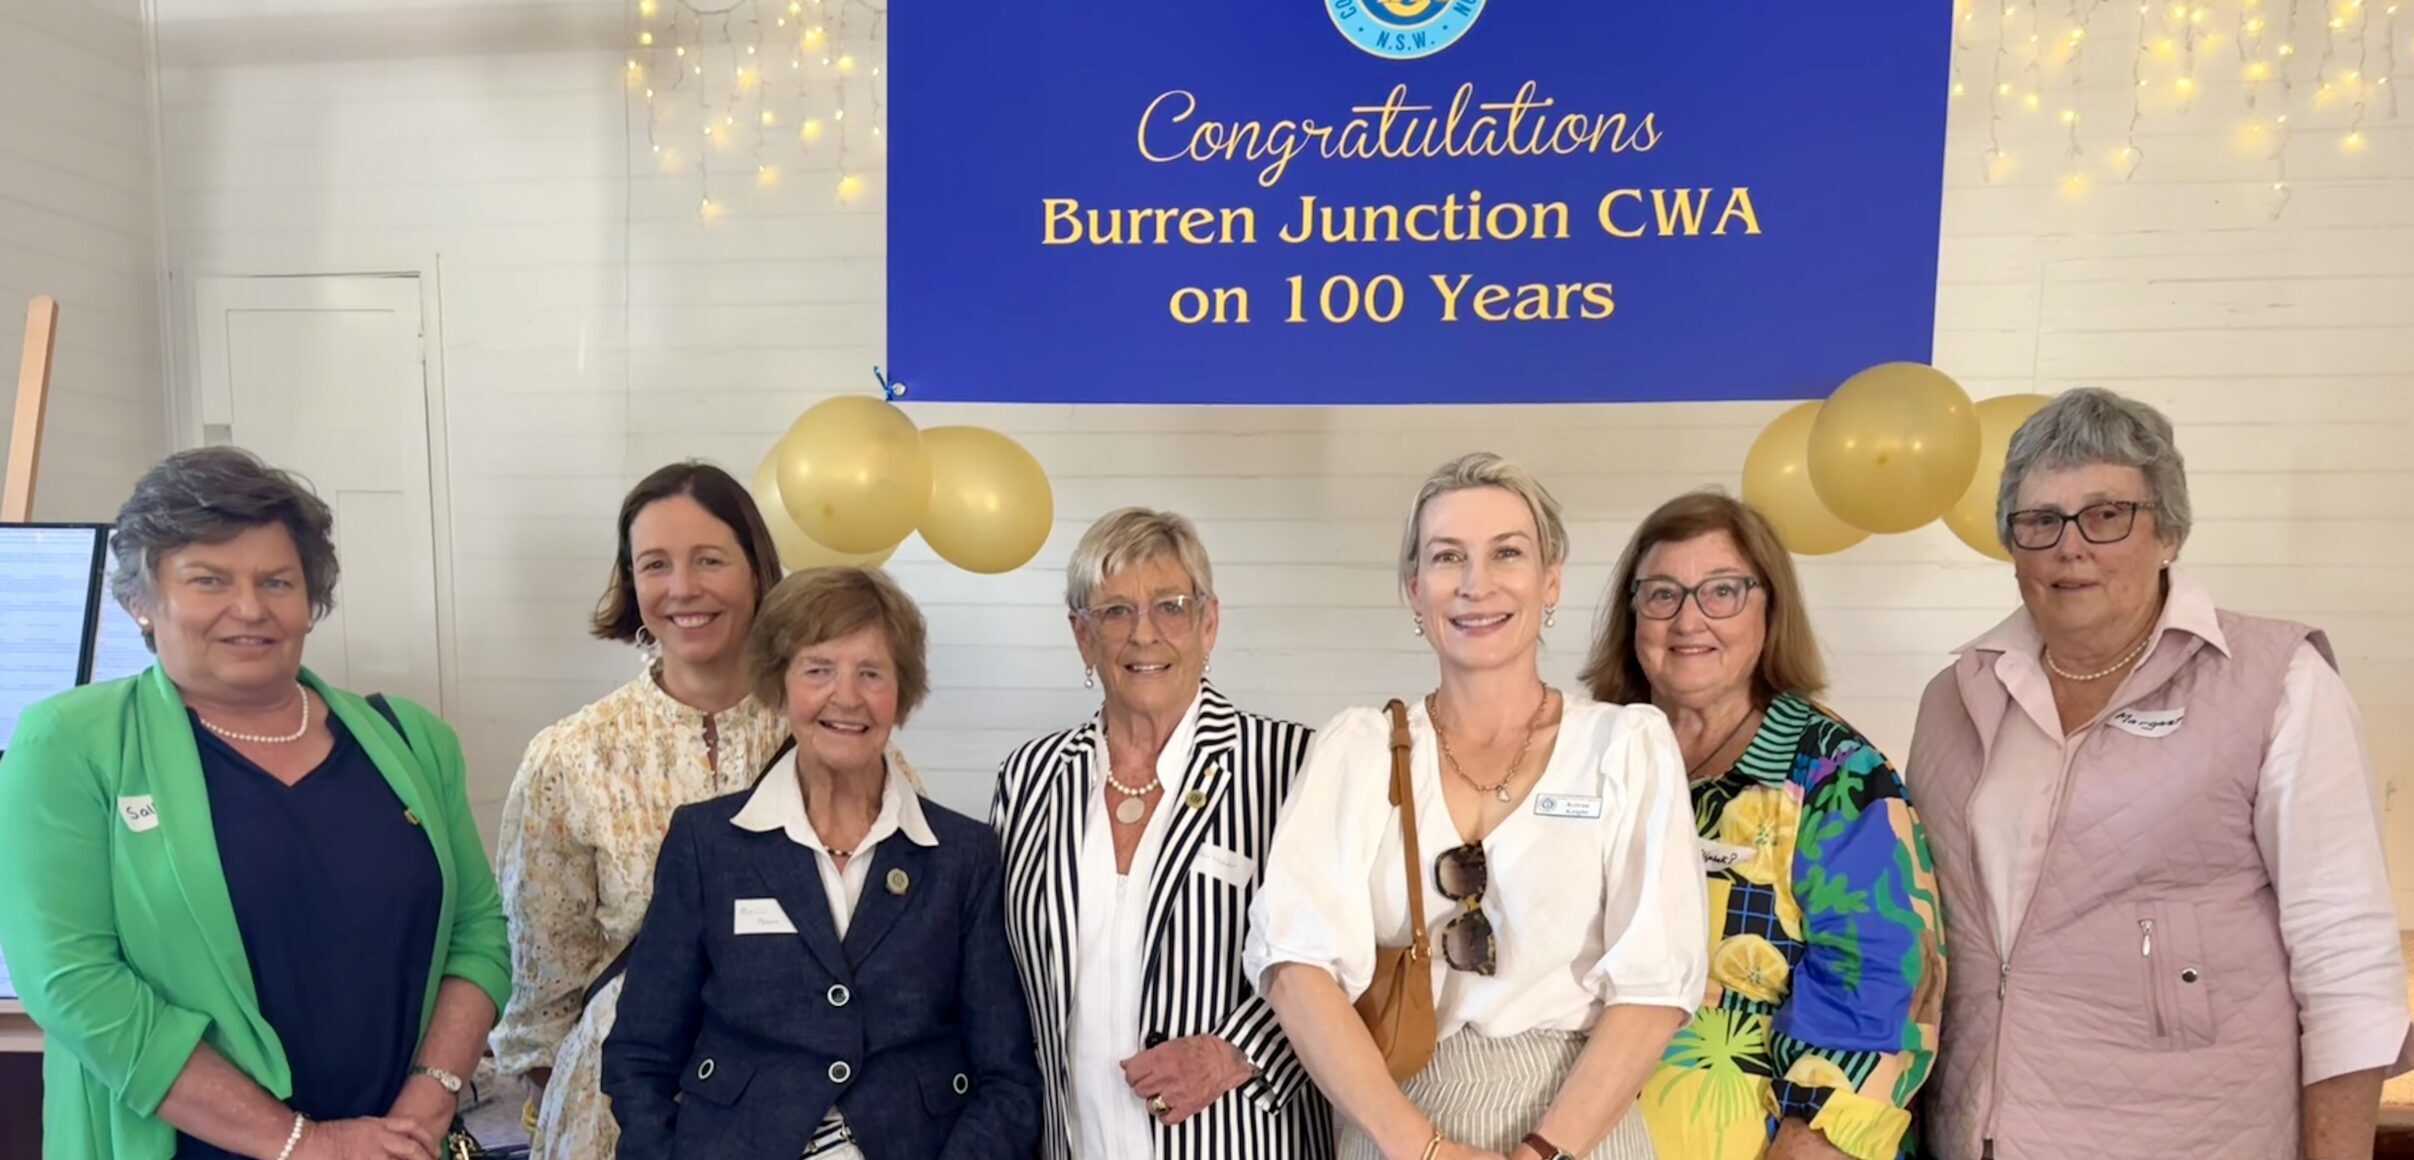 Some of the current Burren Junction CWA members at the centenary celebration on May 26, Sally Croft, Genevieve Sendall, Marcia Moore, Pam Moore OAM, Keiran Knight, Elizabeth Powell and Margaret Constable.